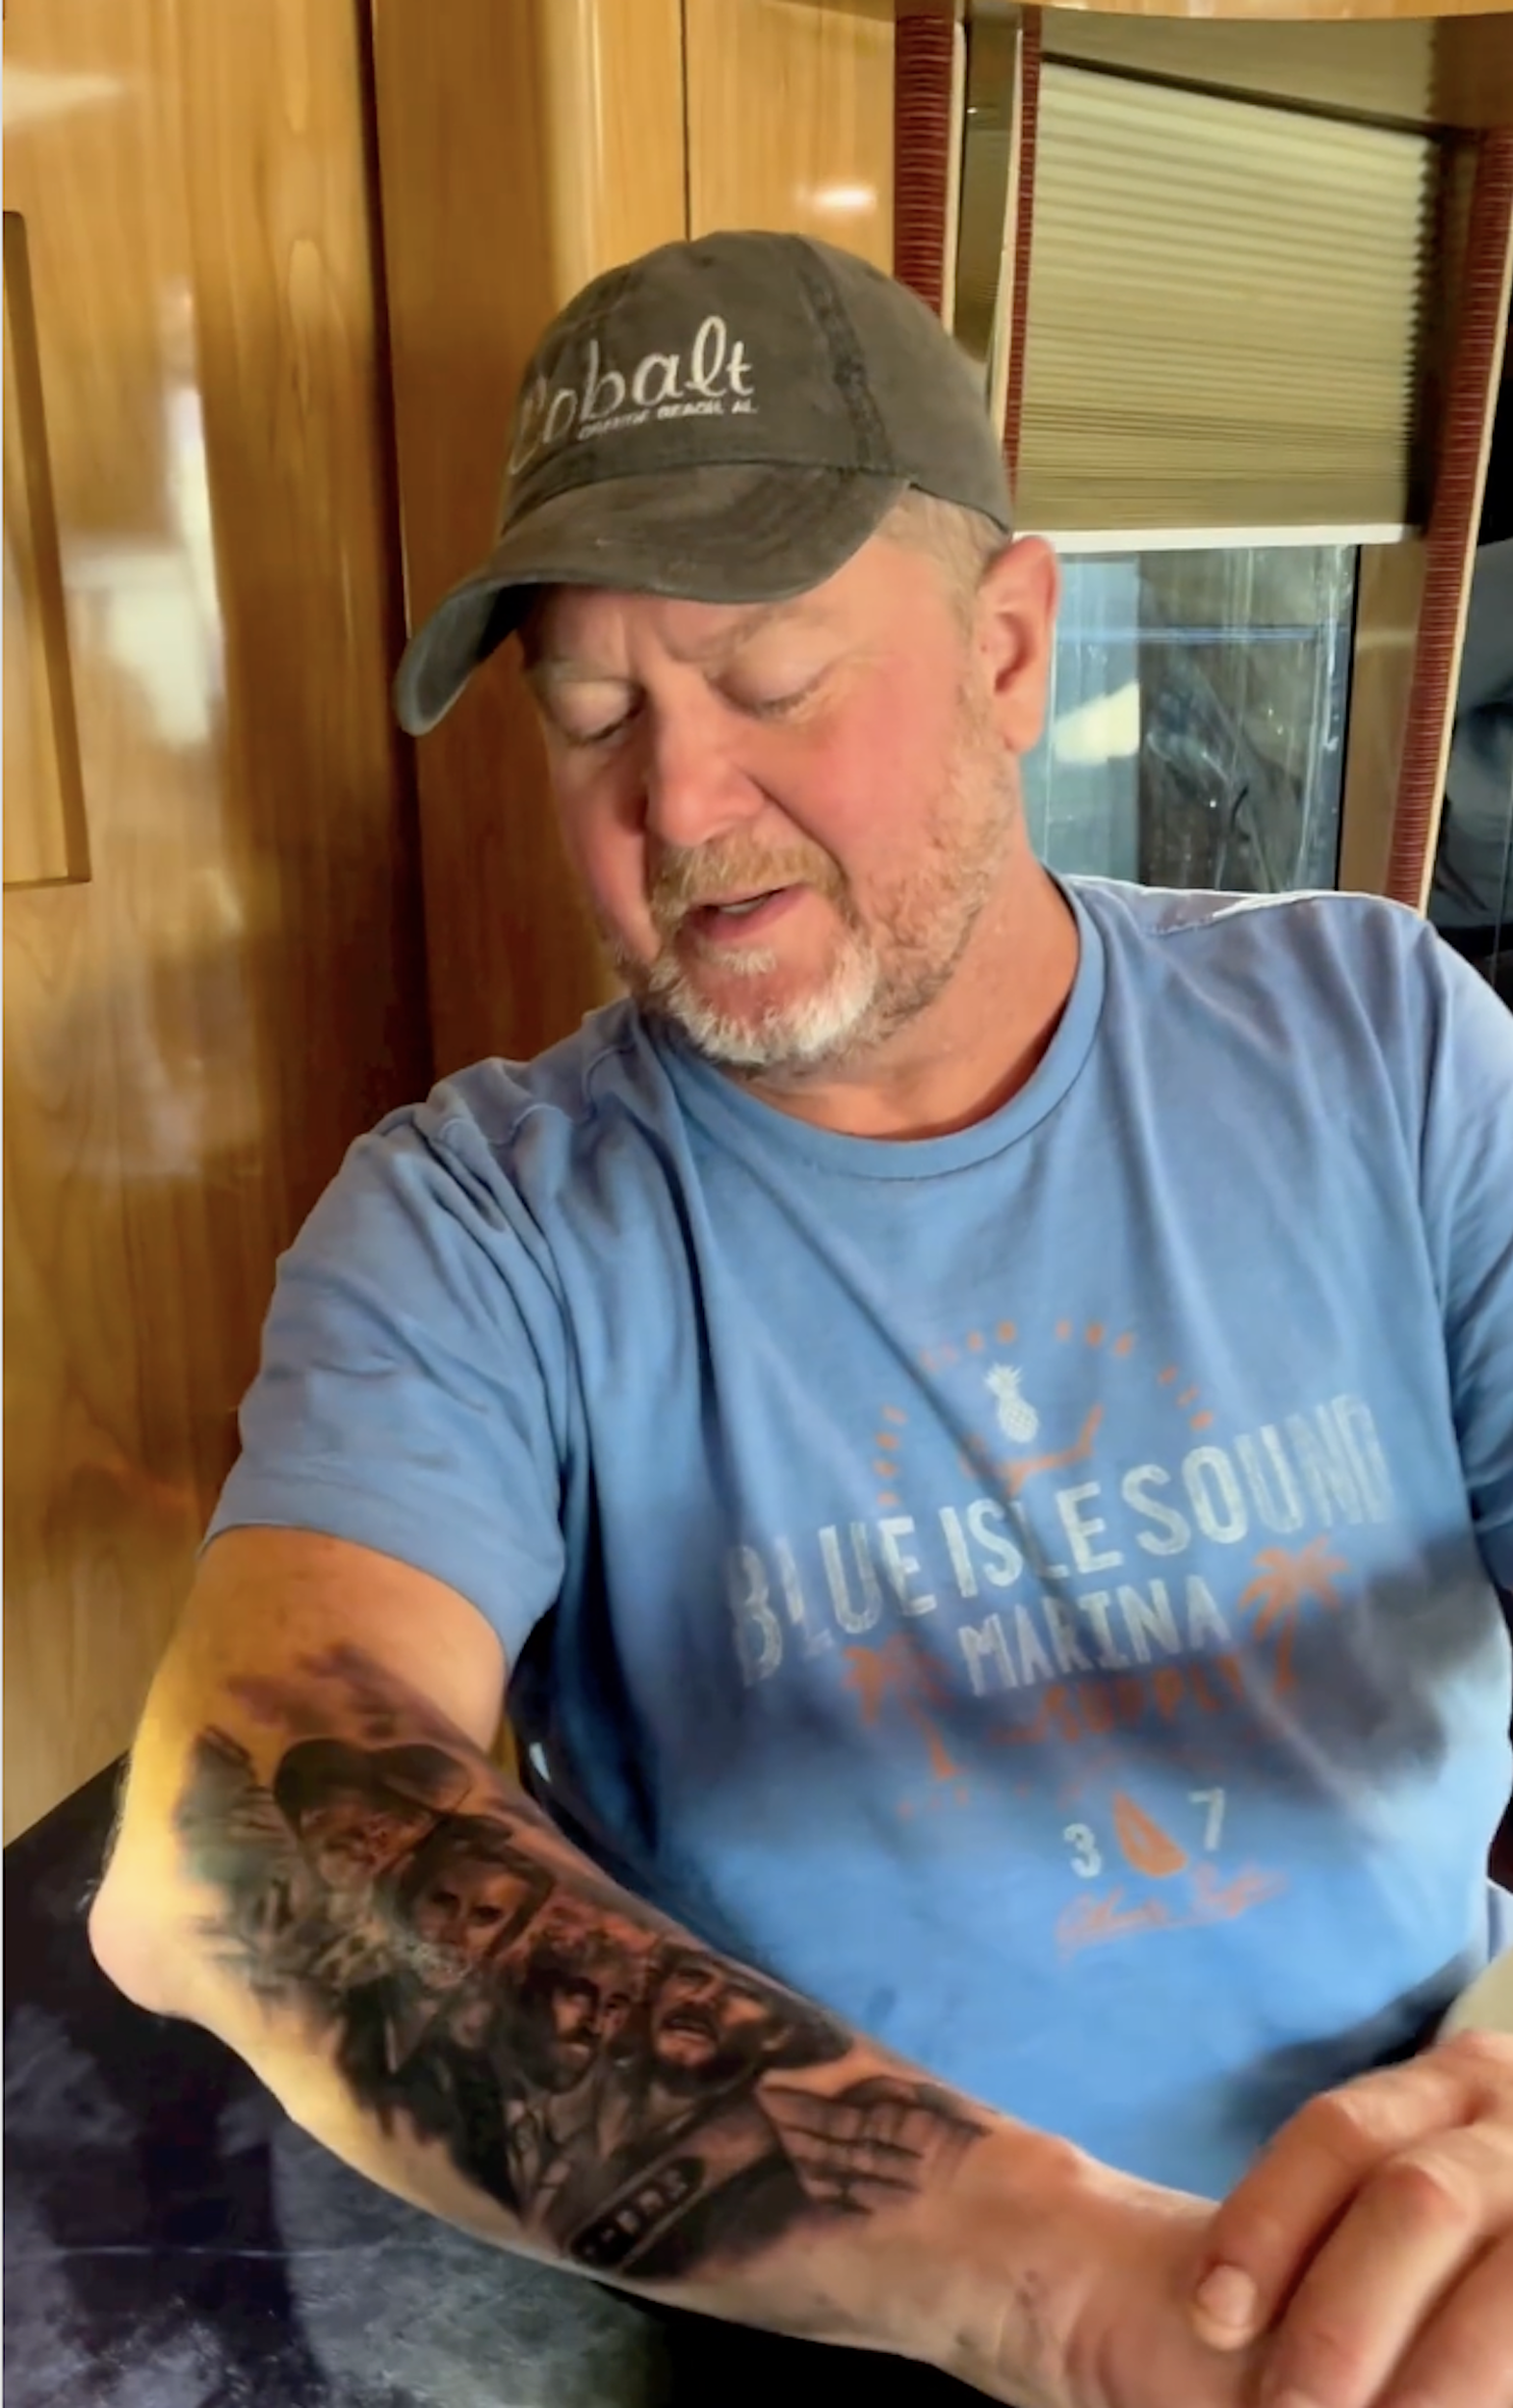 Man travels country, asking strangers to get tattoos with him